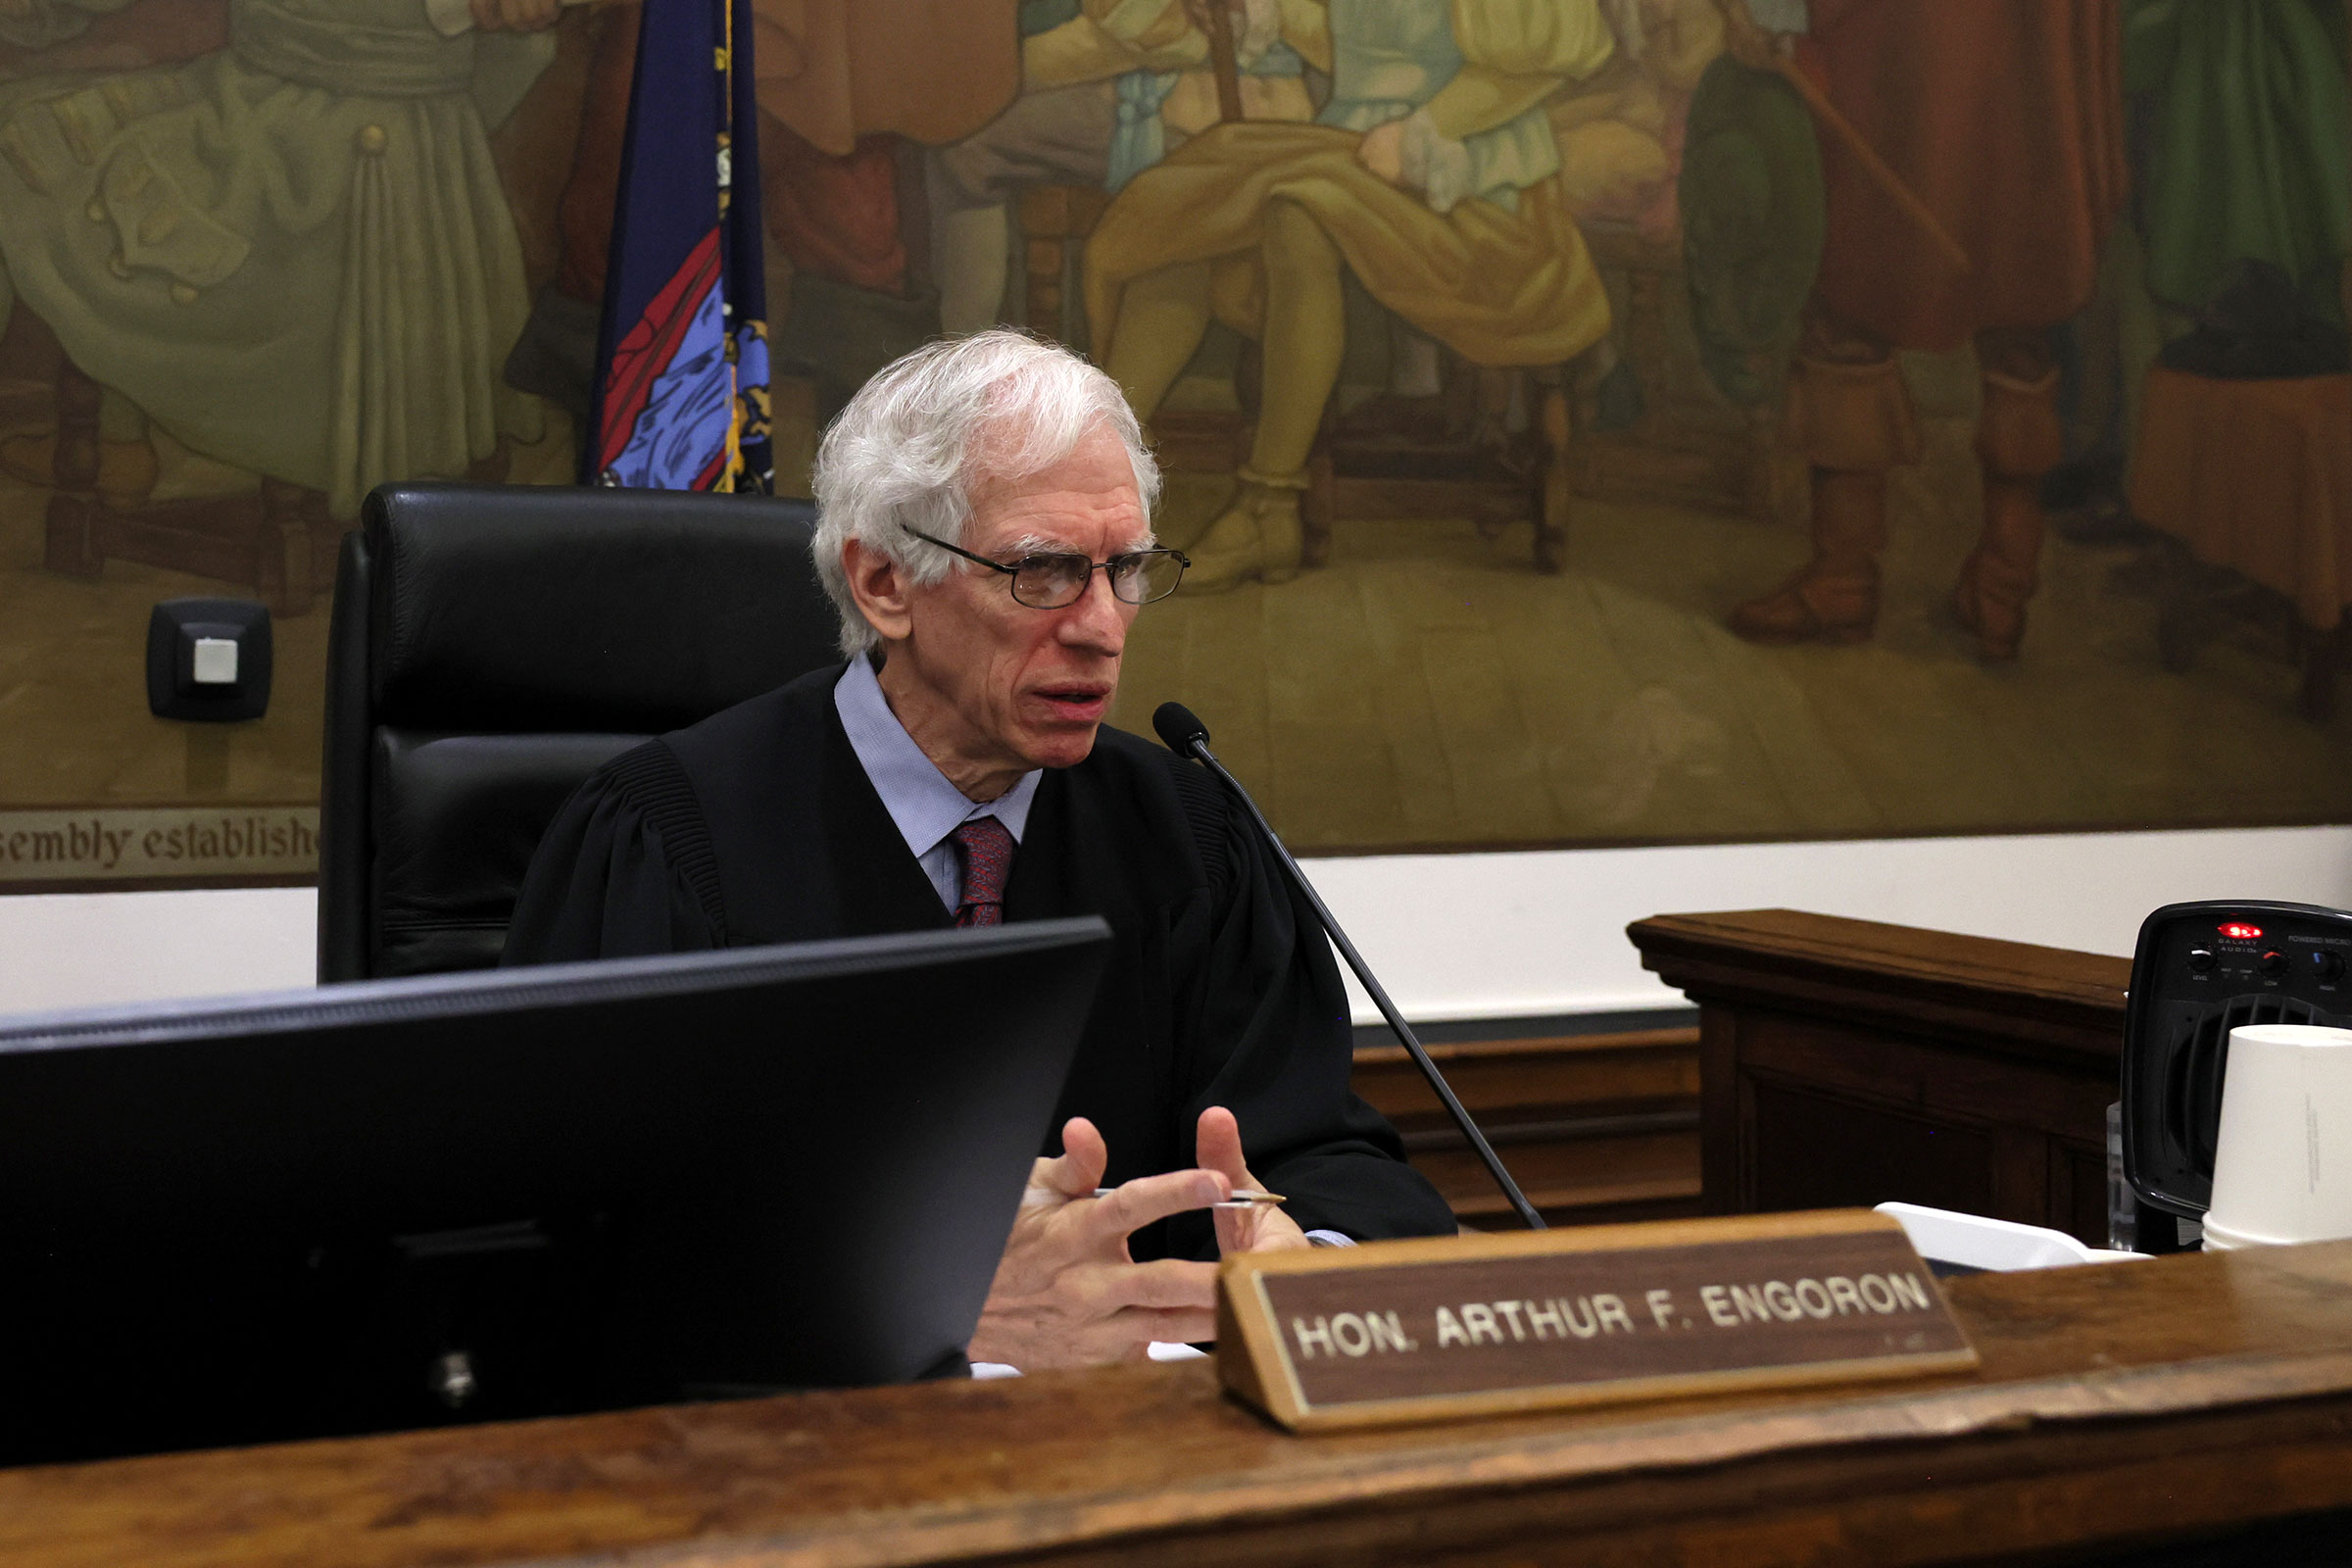 Justice Arthur Engoron presides over the civil fraud trial of former President Donald Trump at New York State Supreme Court on November 6, 2023 in New York City. 